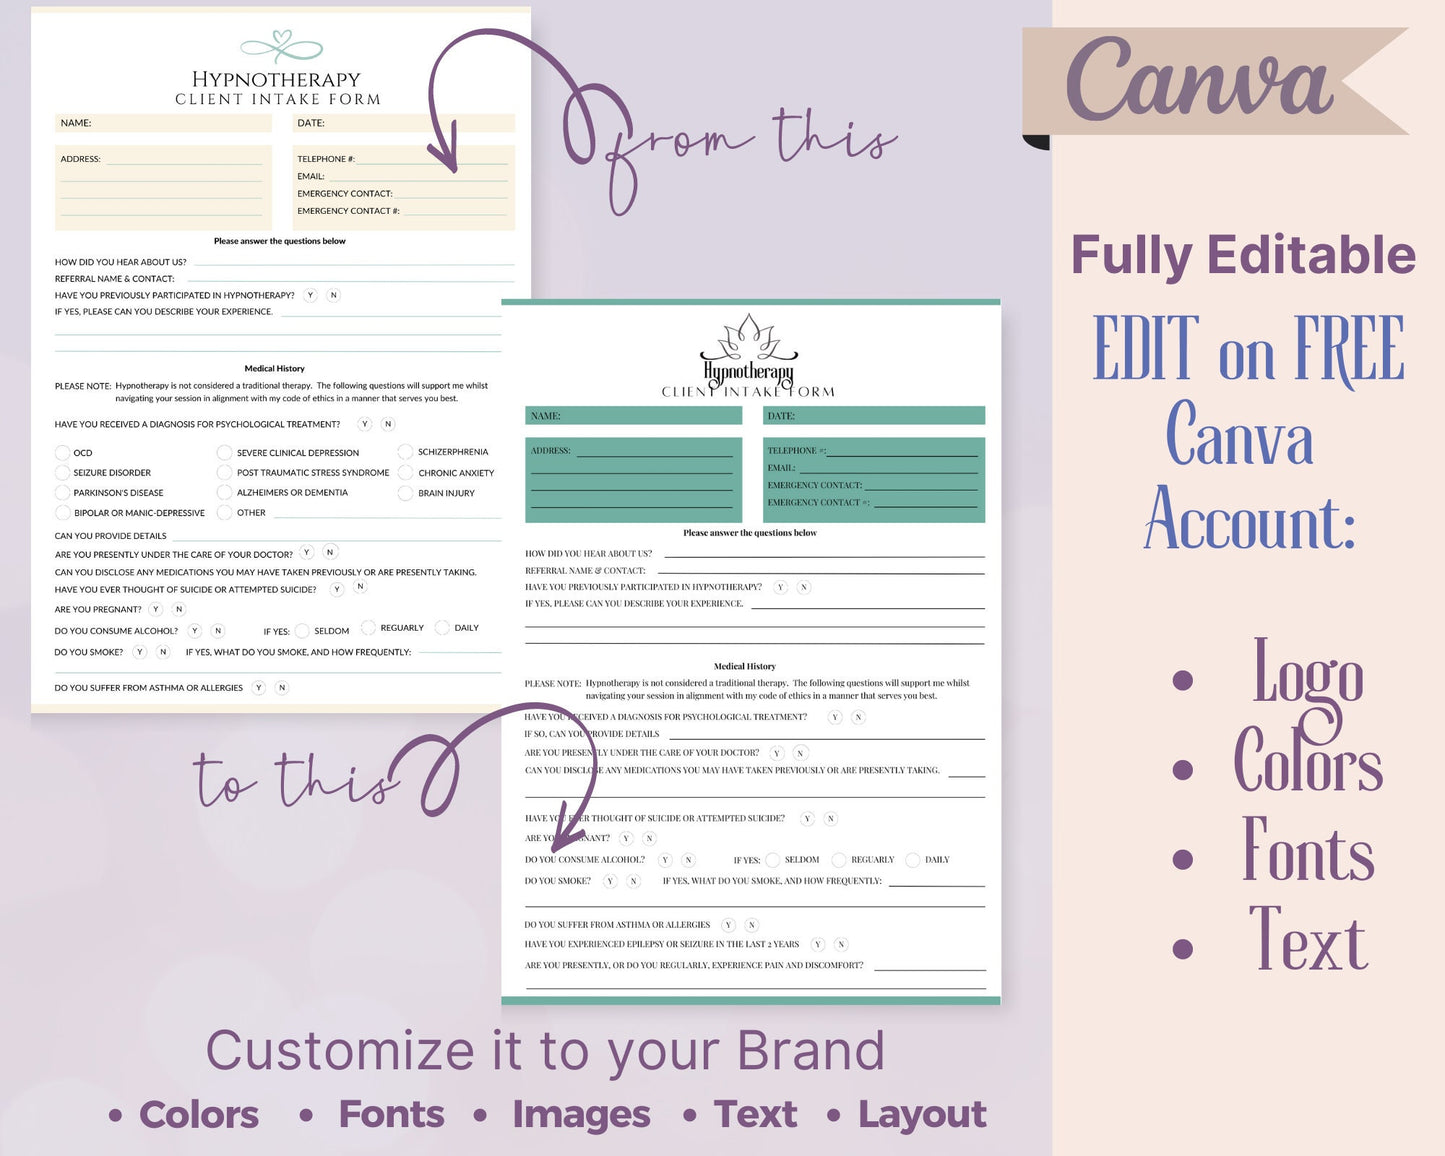 Hypnotherapy Intake Form and Consent Form, Holistic Healing Hypnosis Intake Form Editable in Canva, Hypnotherapy Intake Form Template